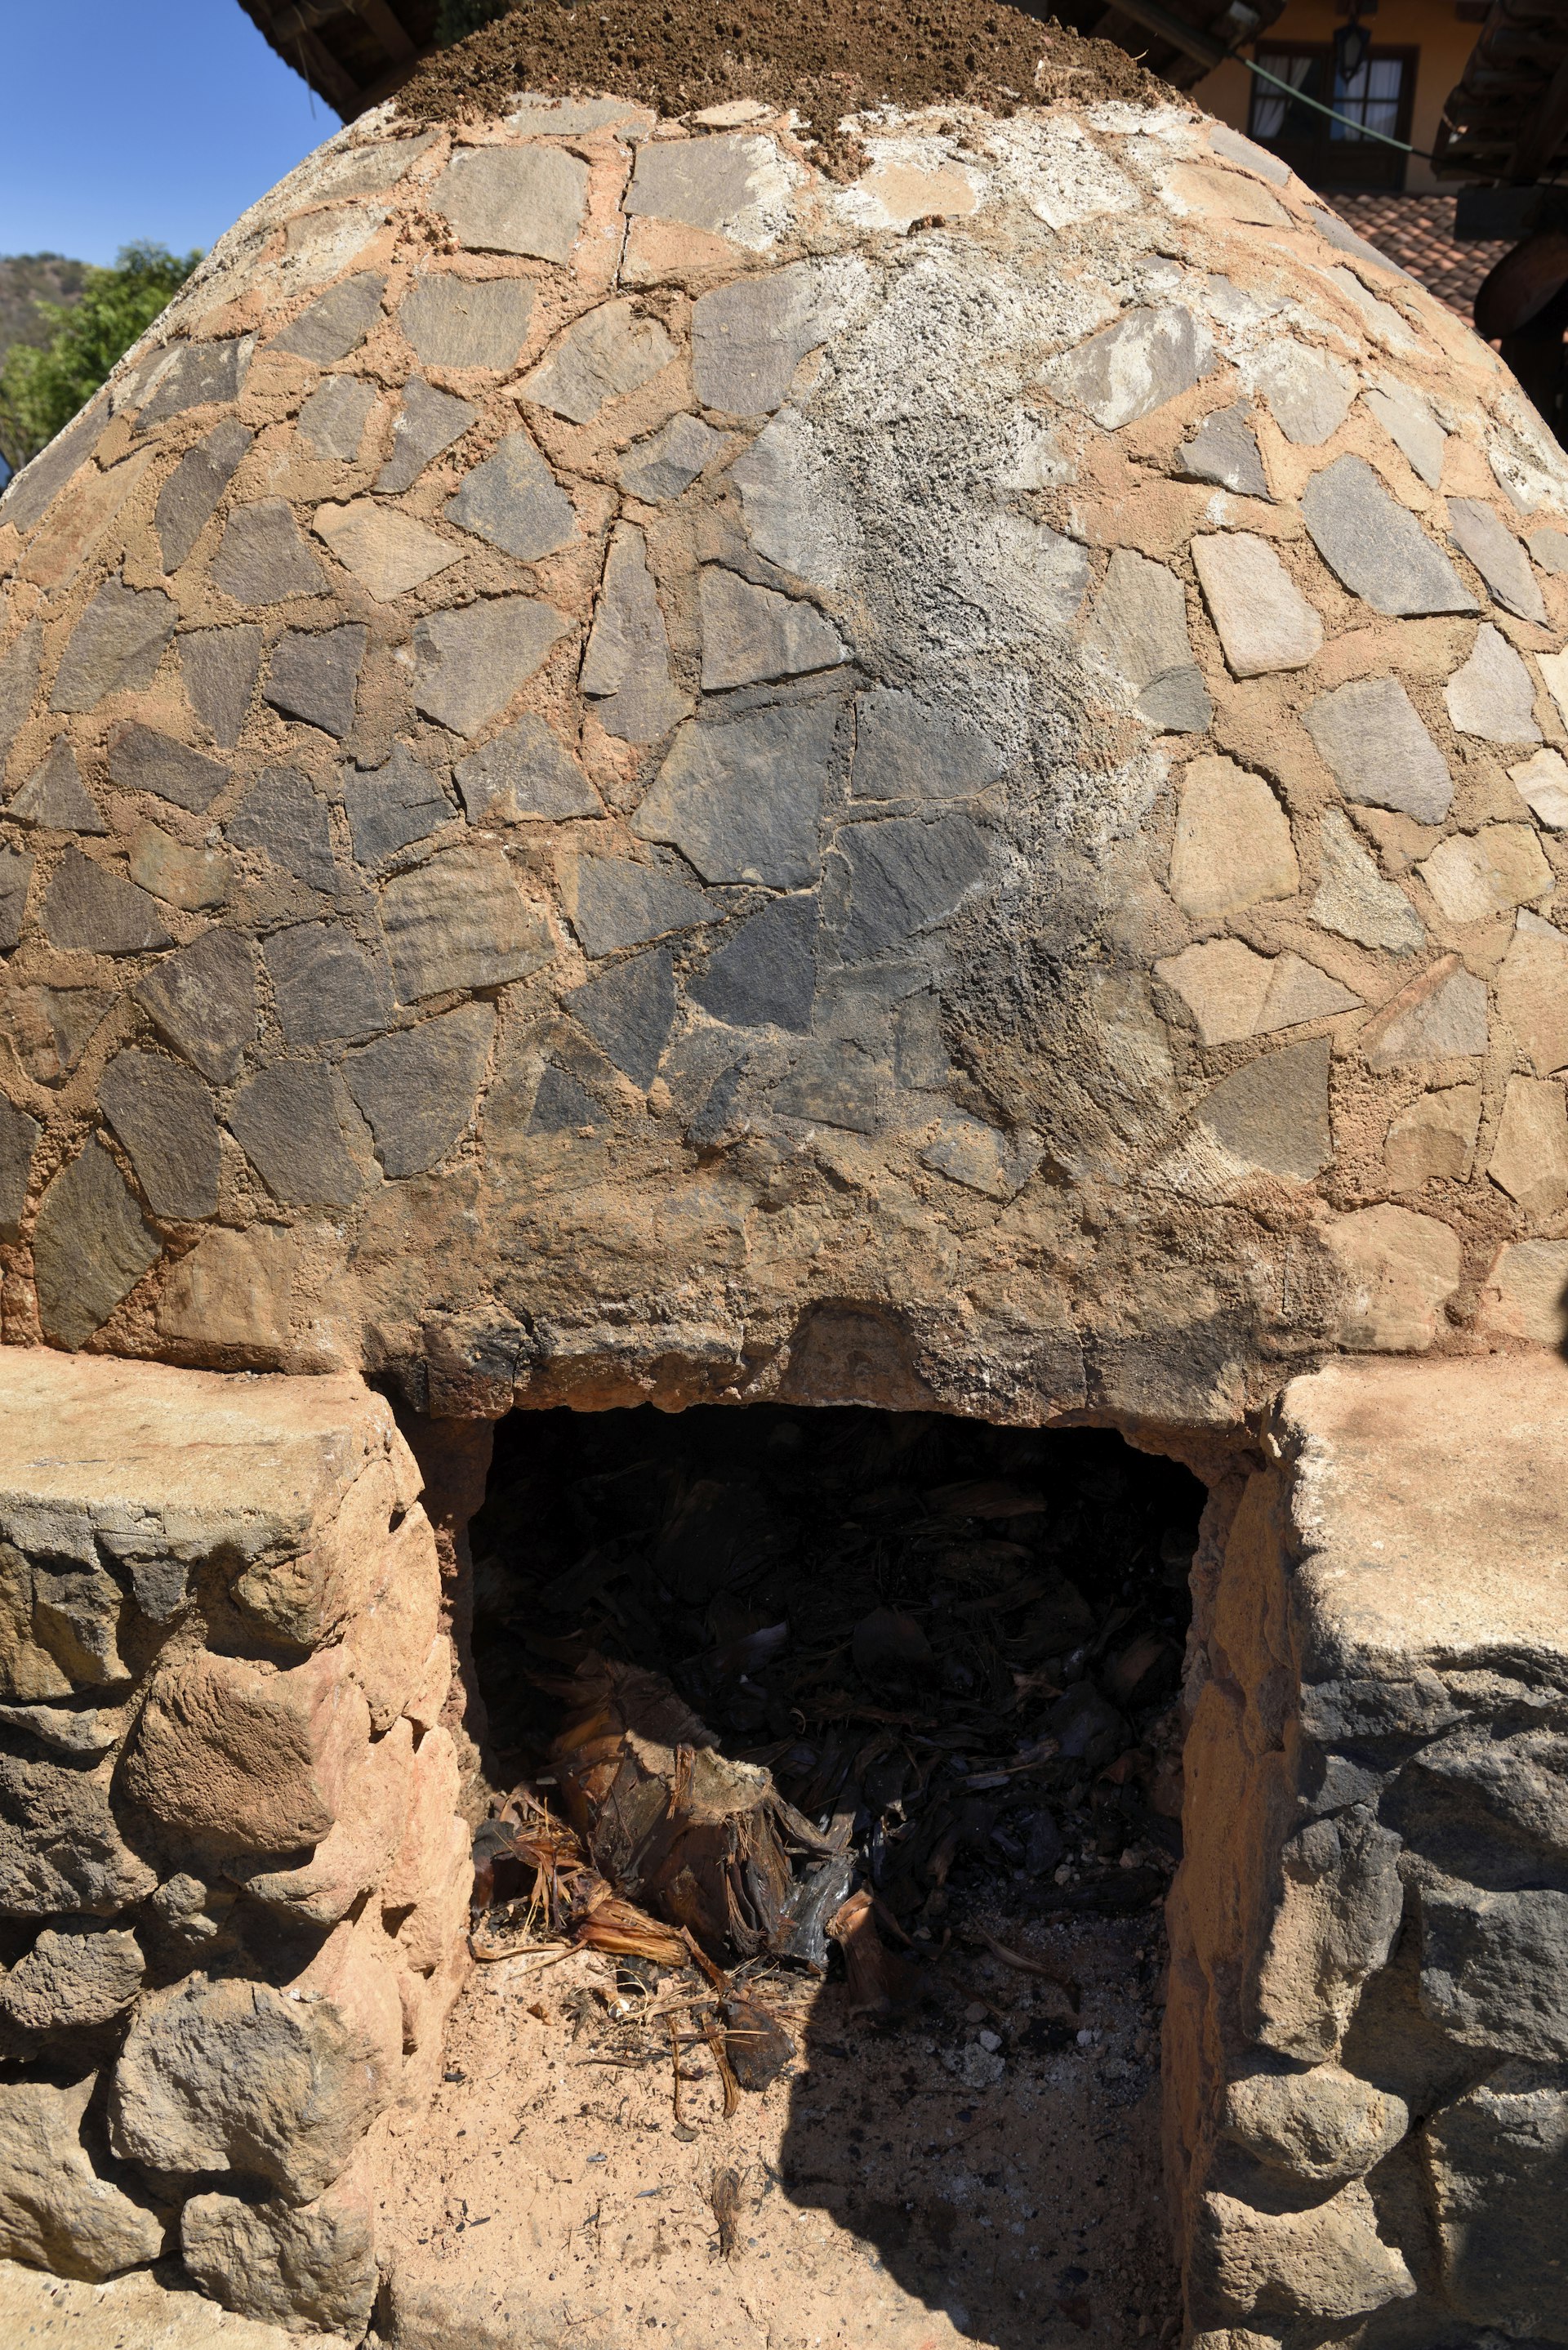 Stone beehive oven for cooking agave to make Tequila in Jalisco Mexico